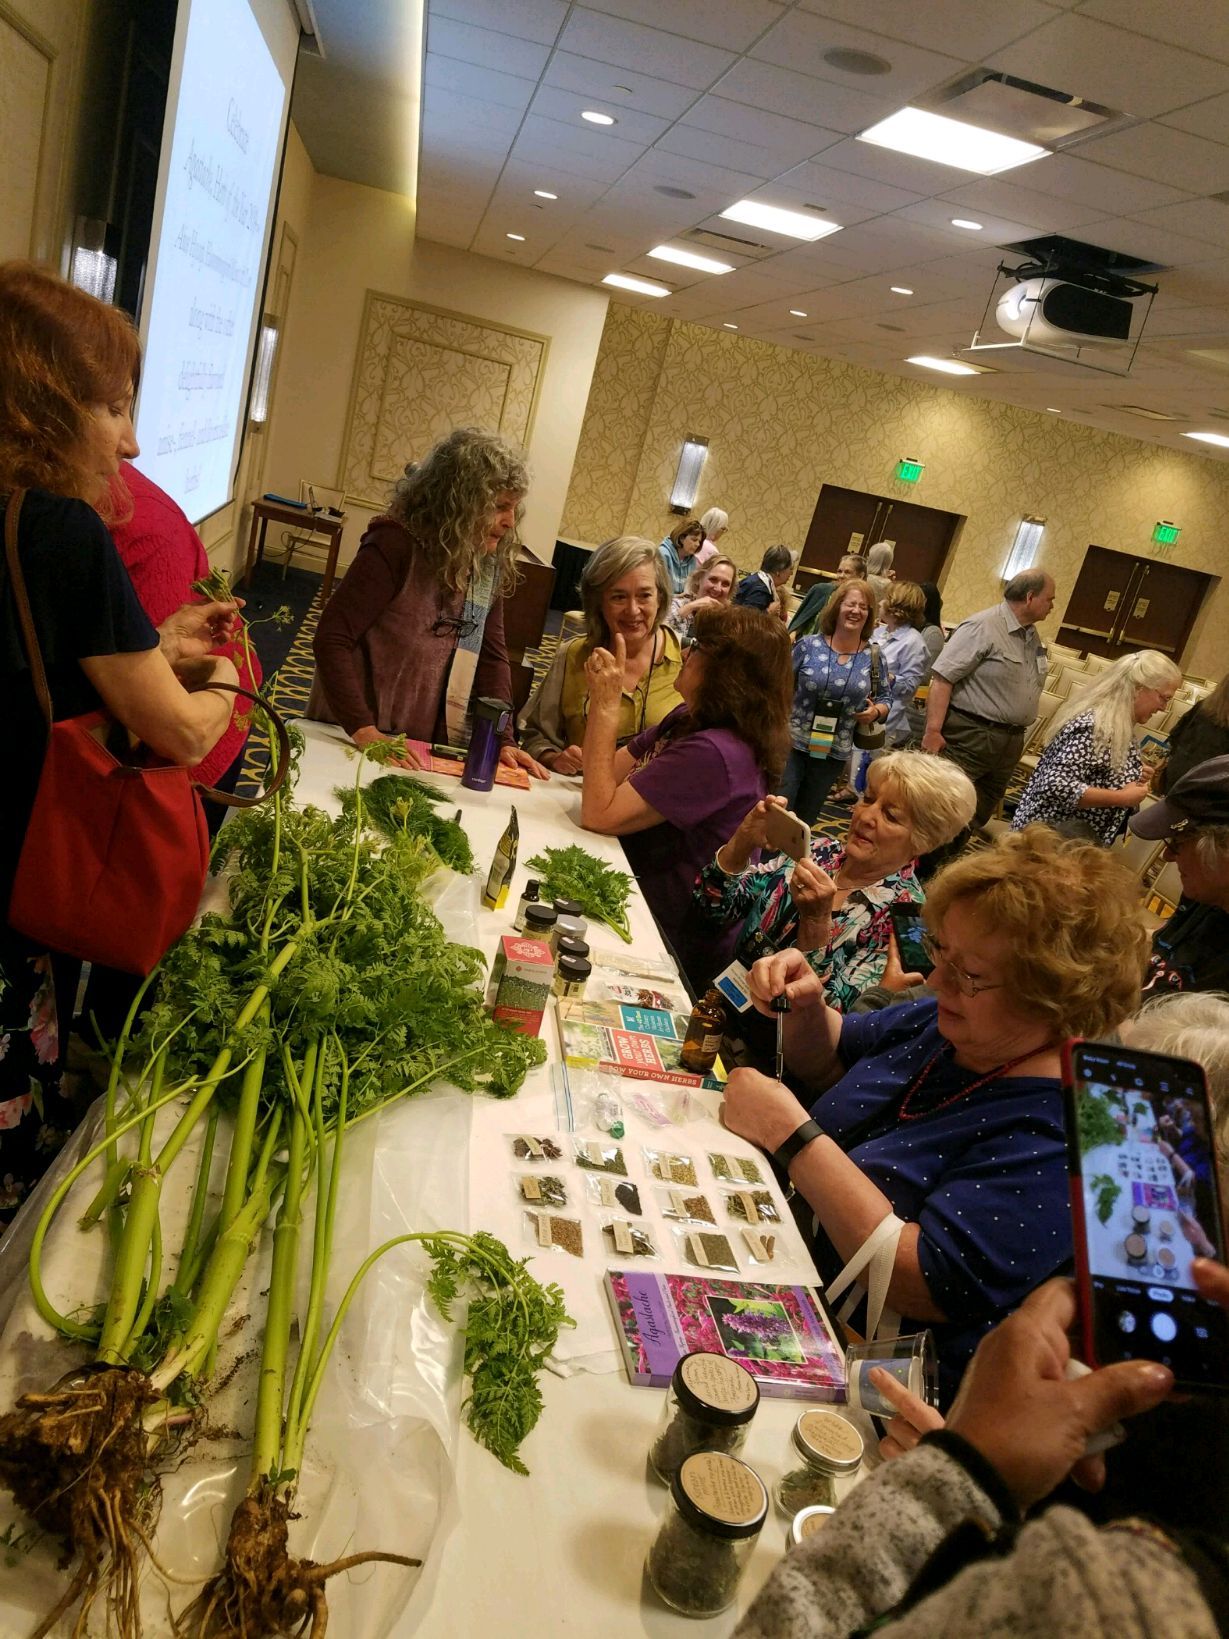 Display table, after author's presentation "Herbs with Anise-, Fennel- and Licorice-Like Flavors" at the HSA annual conference.